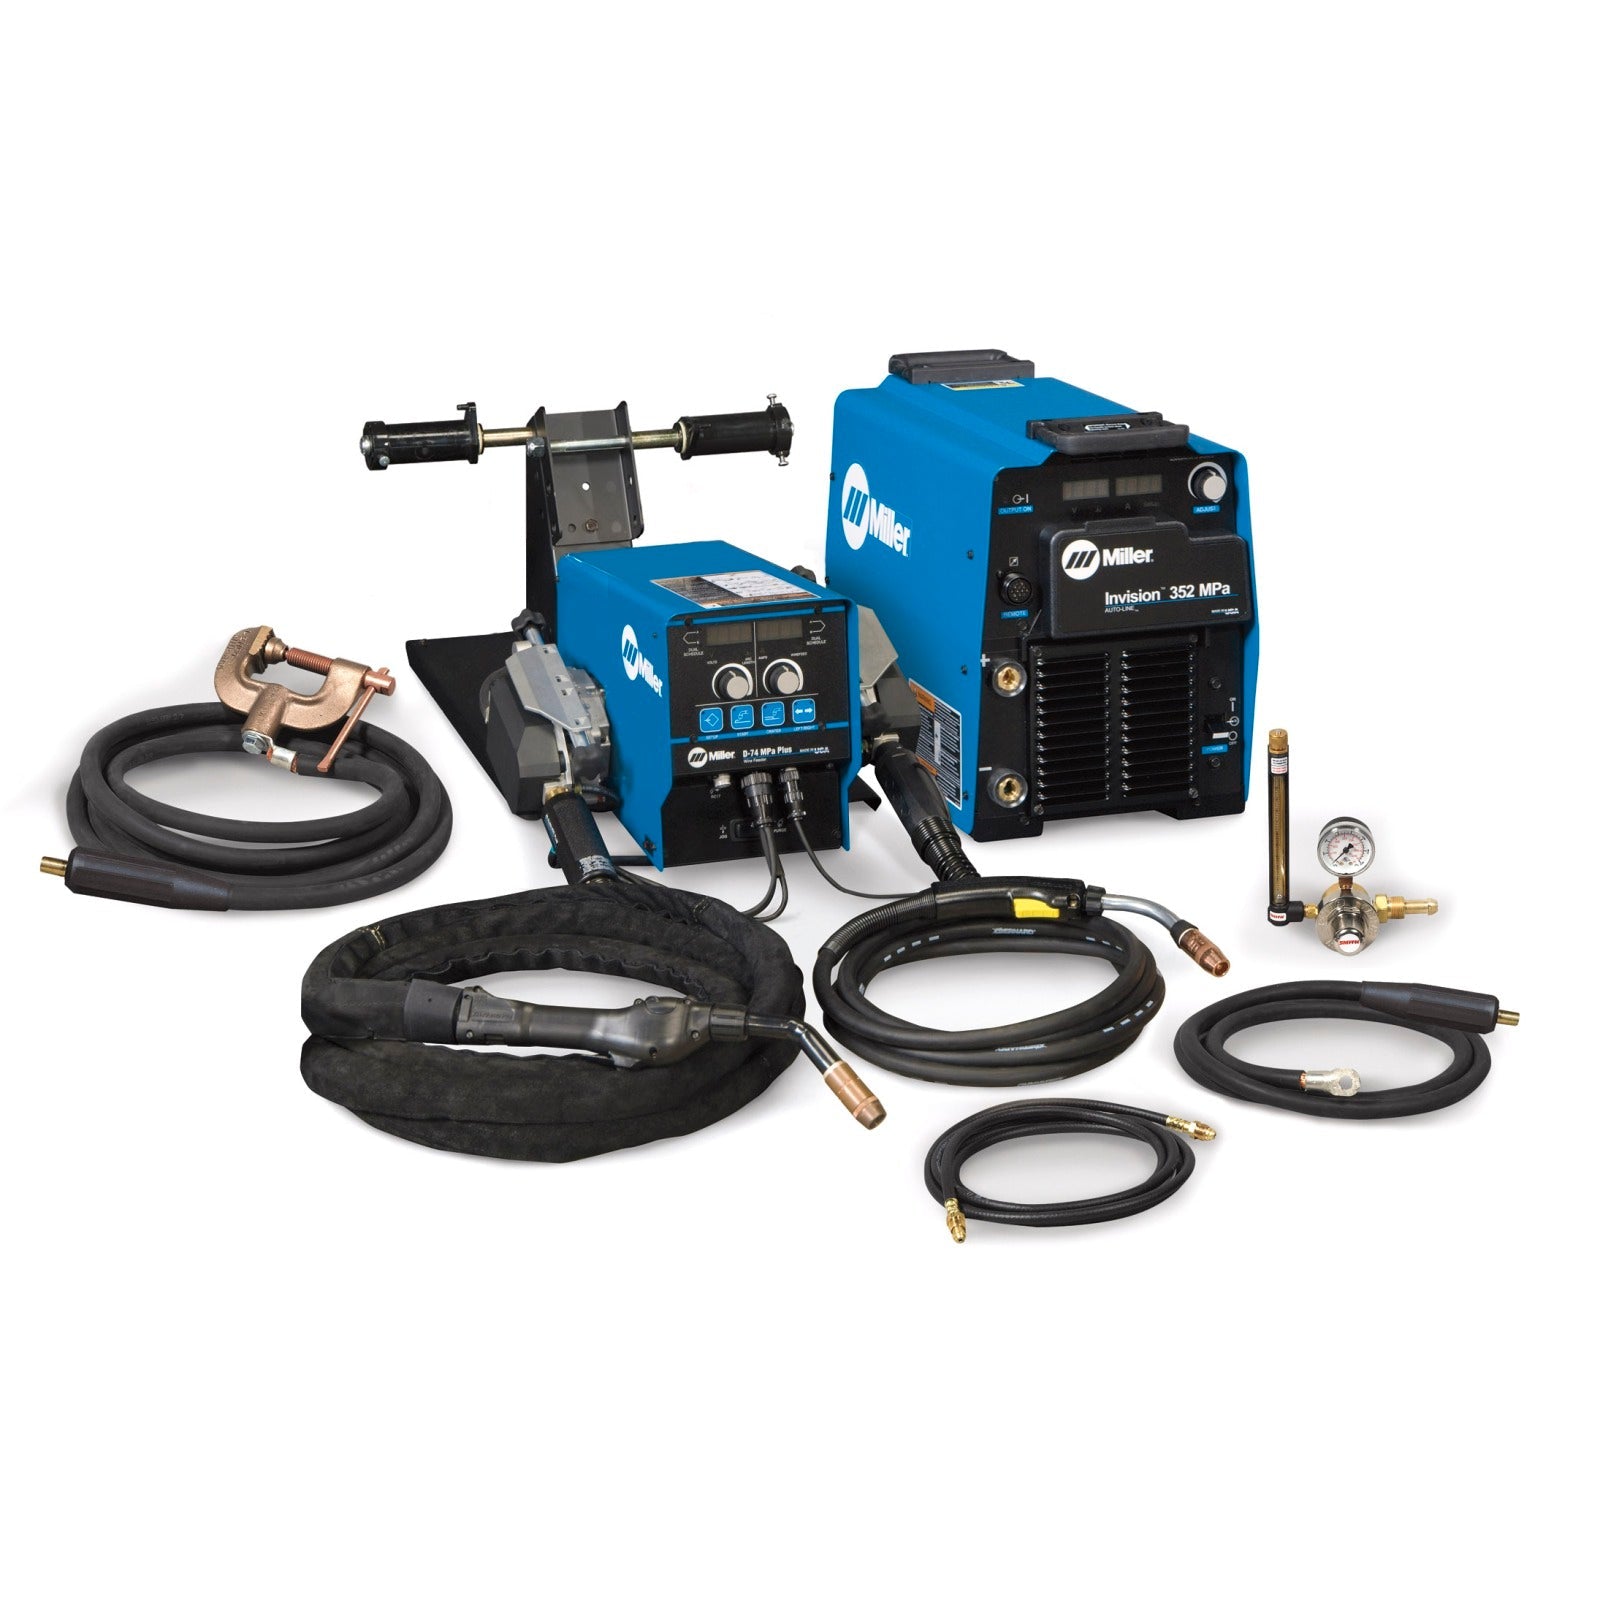 Miller Invision 352 MPa MIG Welder with D-74 Feeder and Accessory Package (951502)